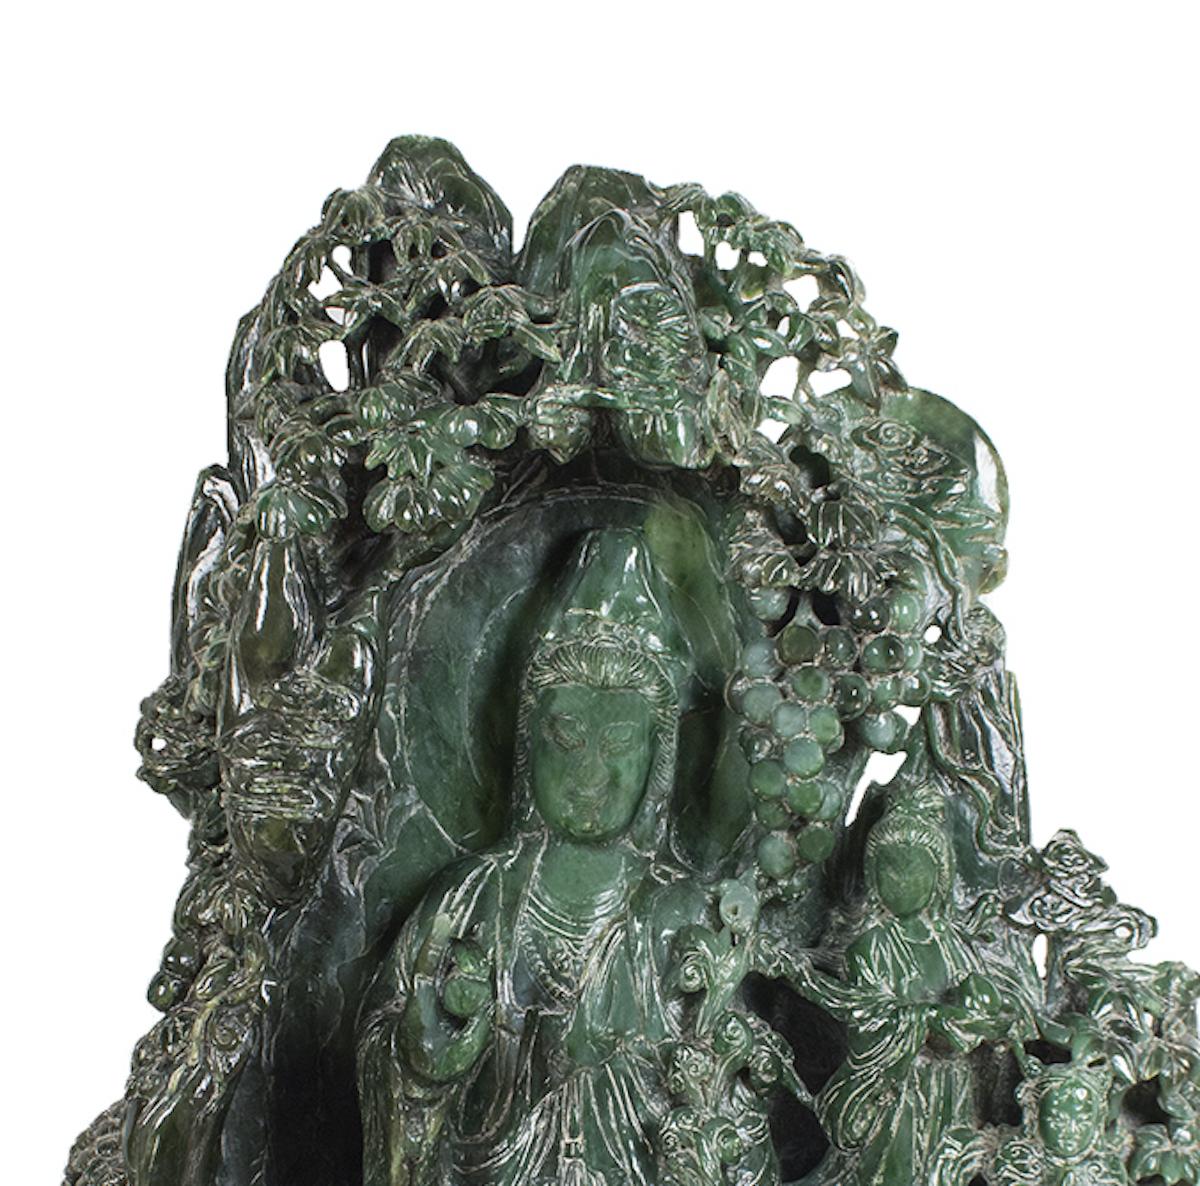 This Chinese hardstone carving of Guanyin is a large late 20th century statue superbly representing the 